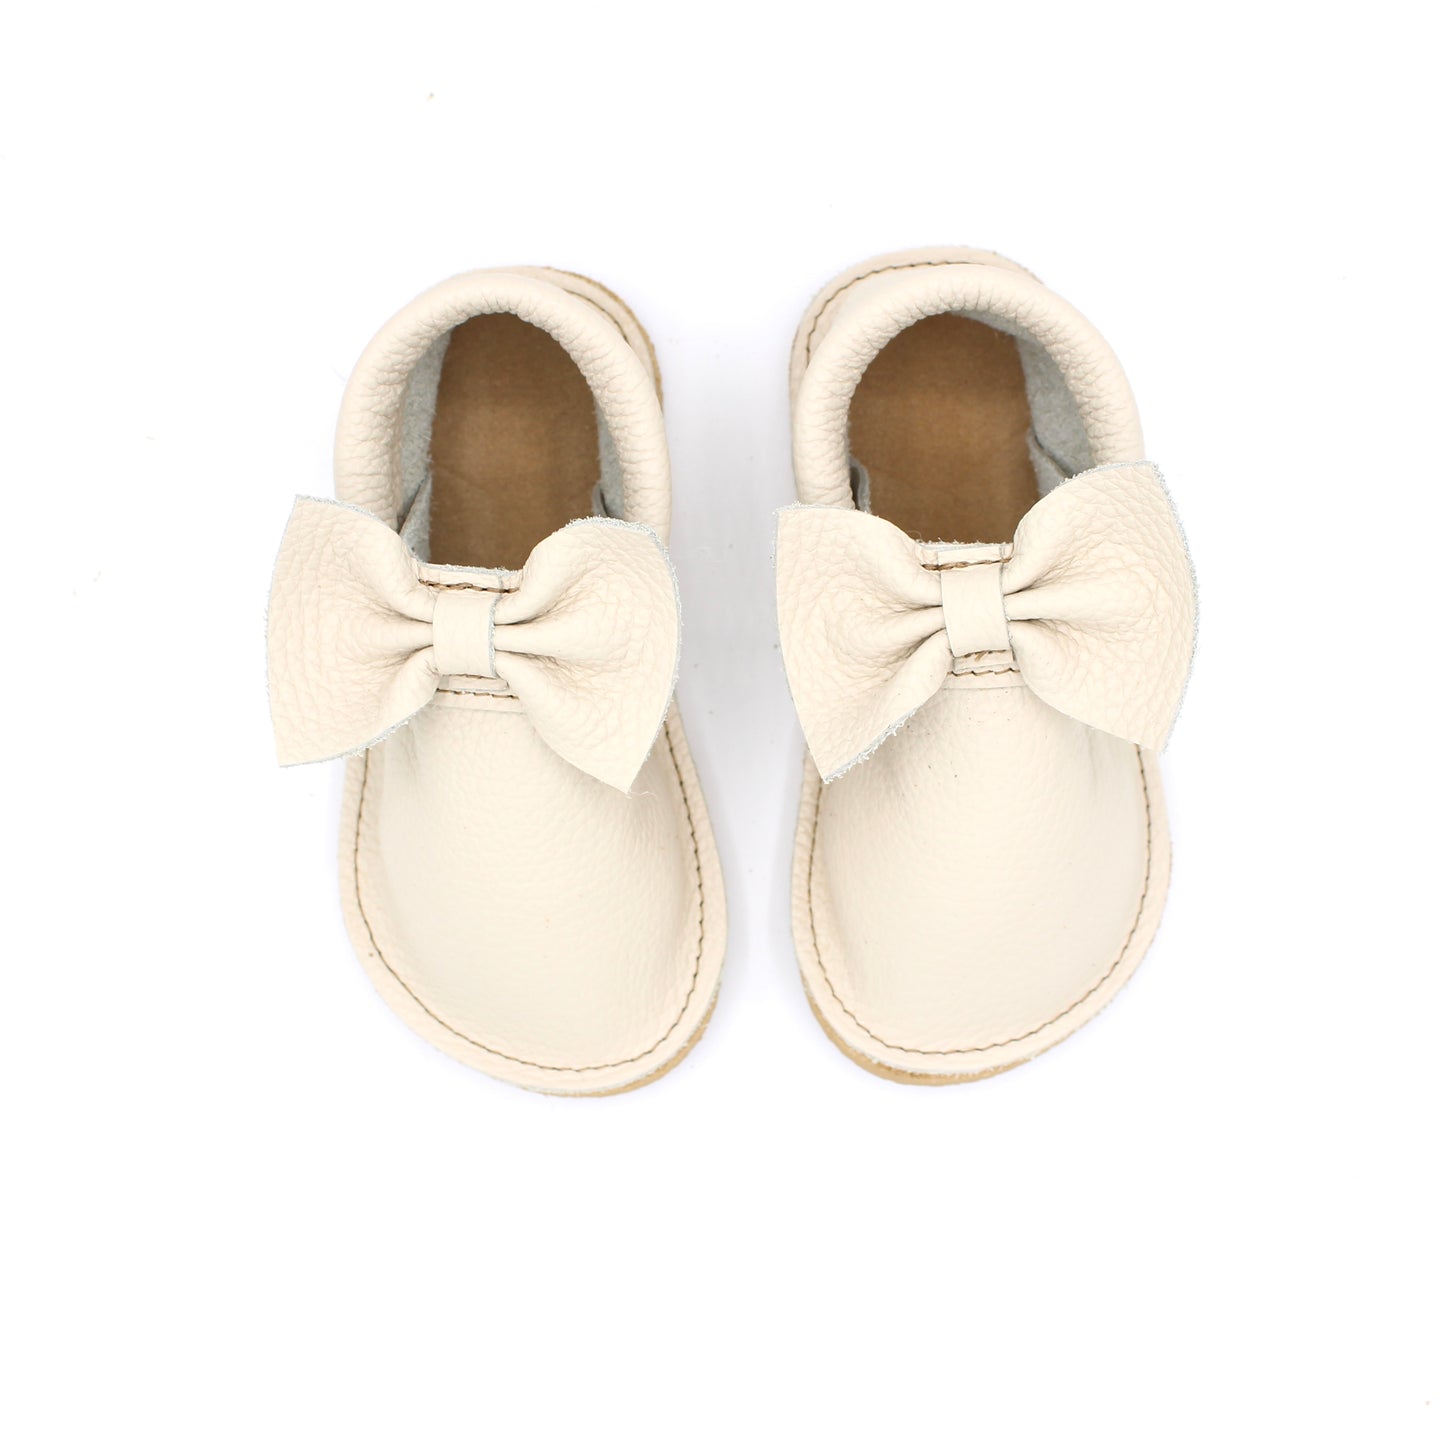 TODDLER Bow Mocs - Coconut - 6mm Hybrid Soles